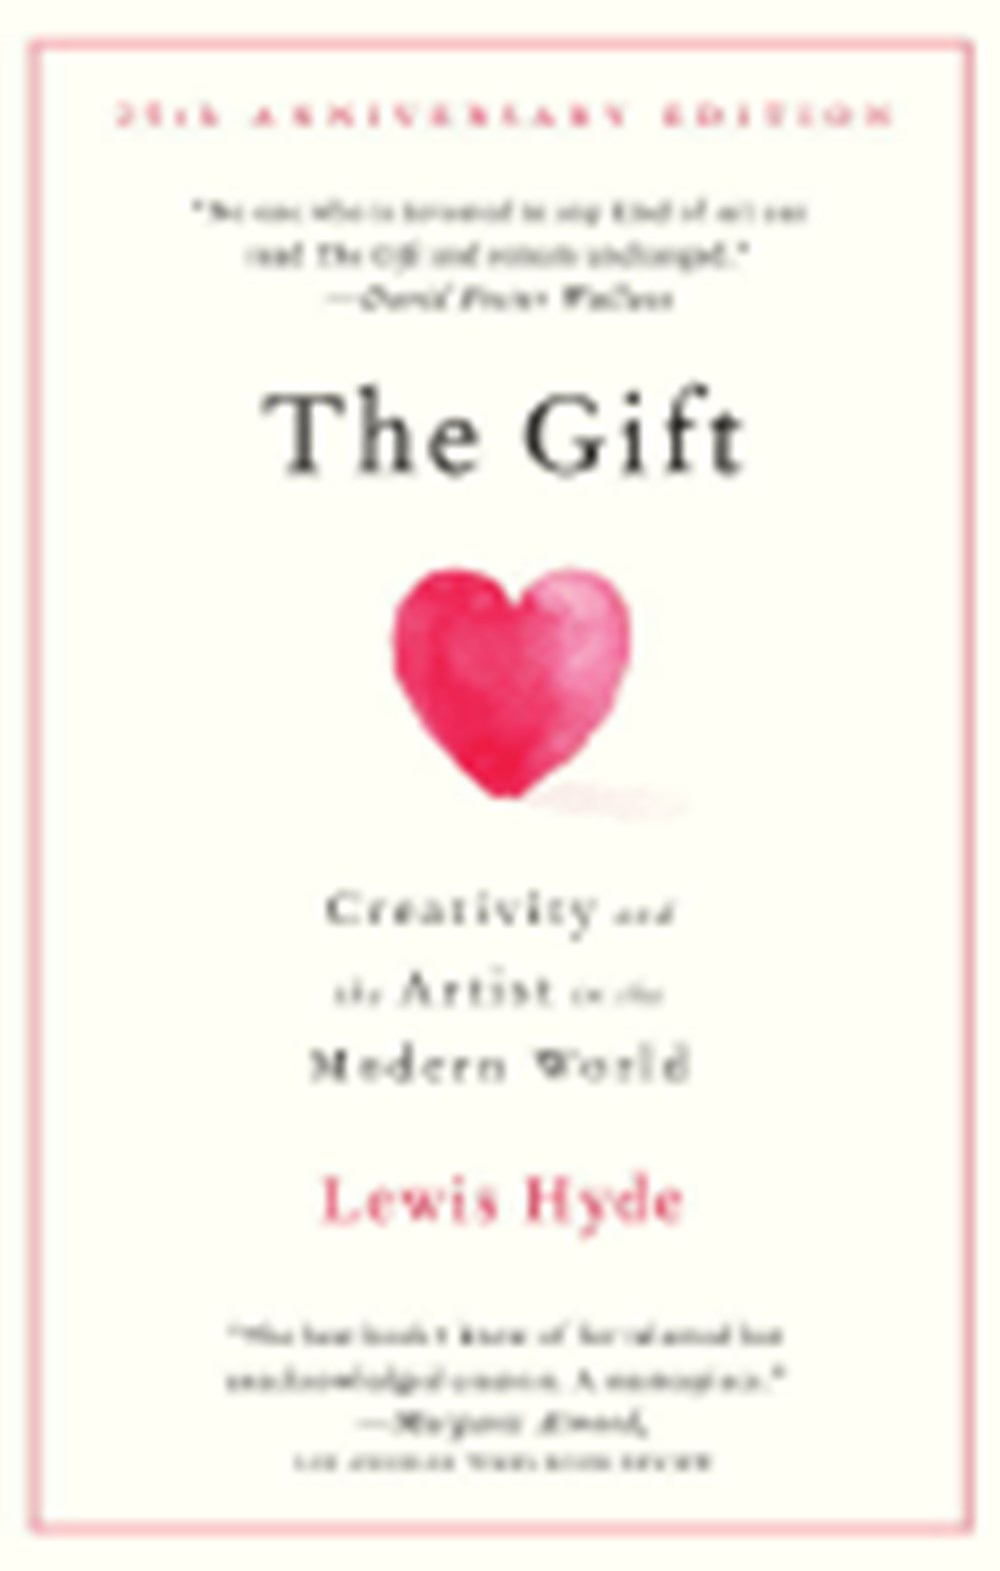 Gift Creativity and the Artist in the Modern World (Anniversary)